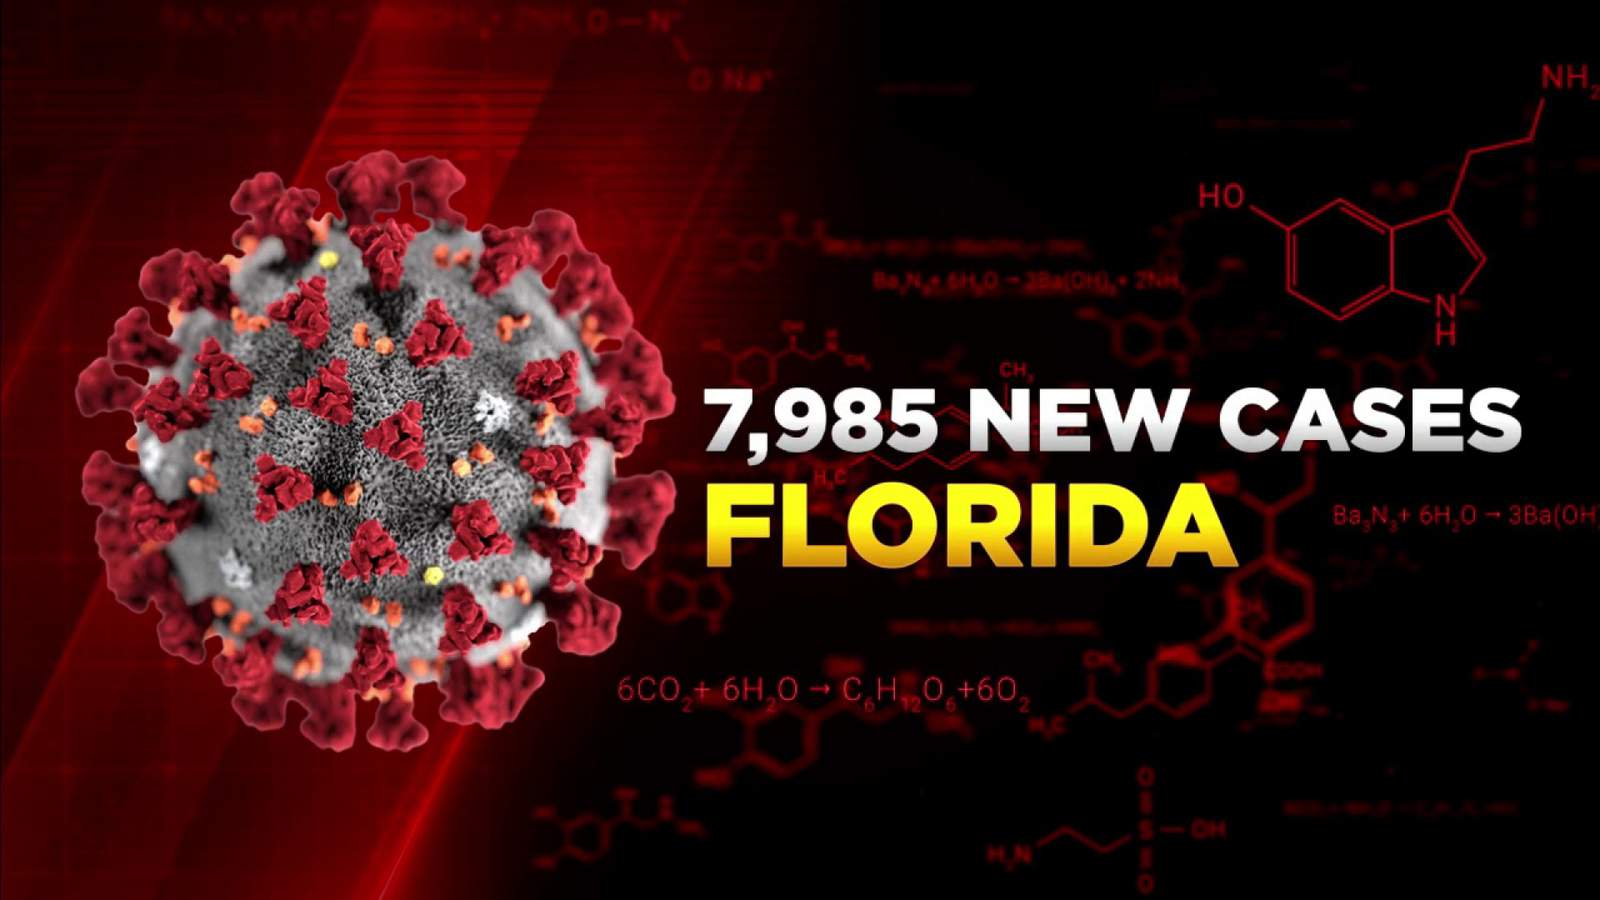 Florida adds 7,985 coronavirus cases Tuesday and 92 deaths